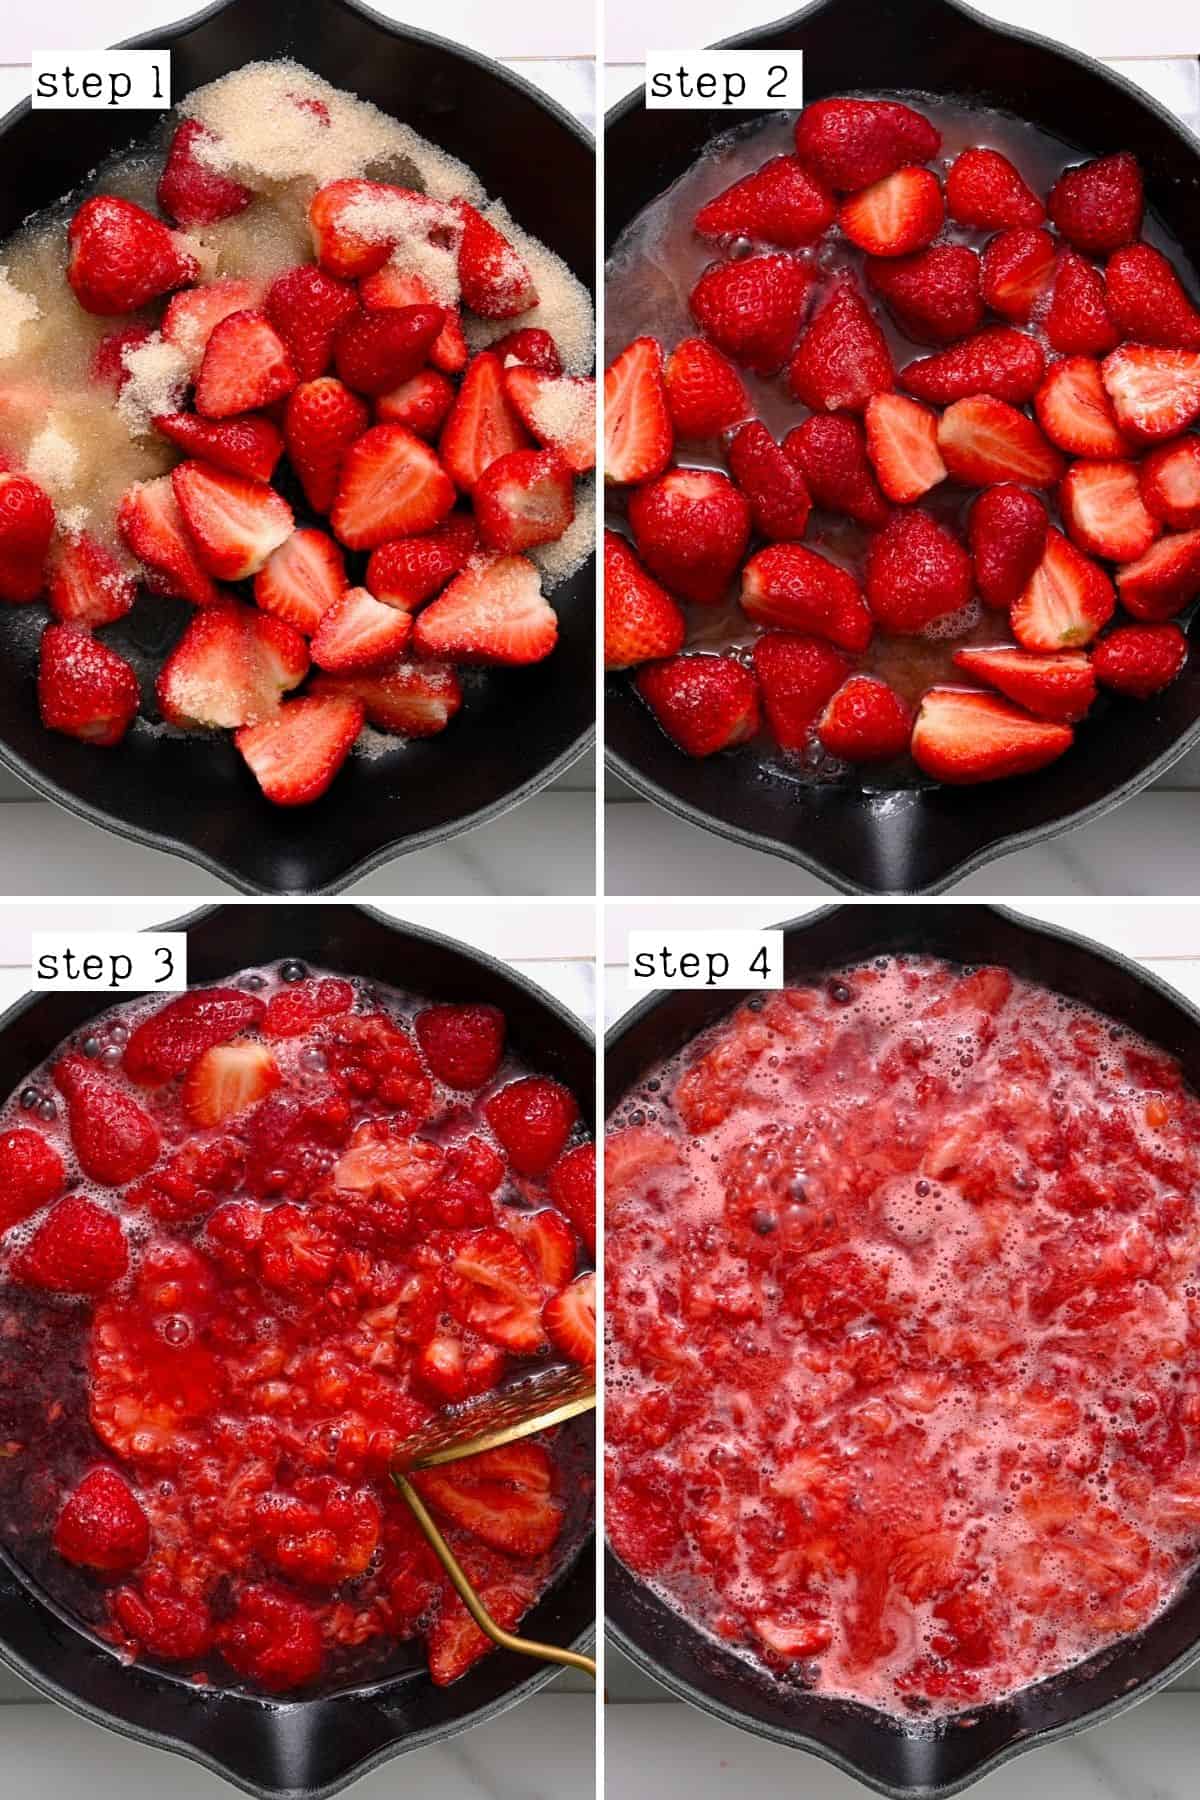 Steps for making strawberry syrup